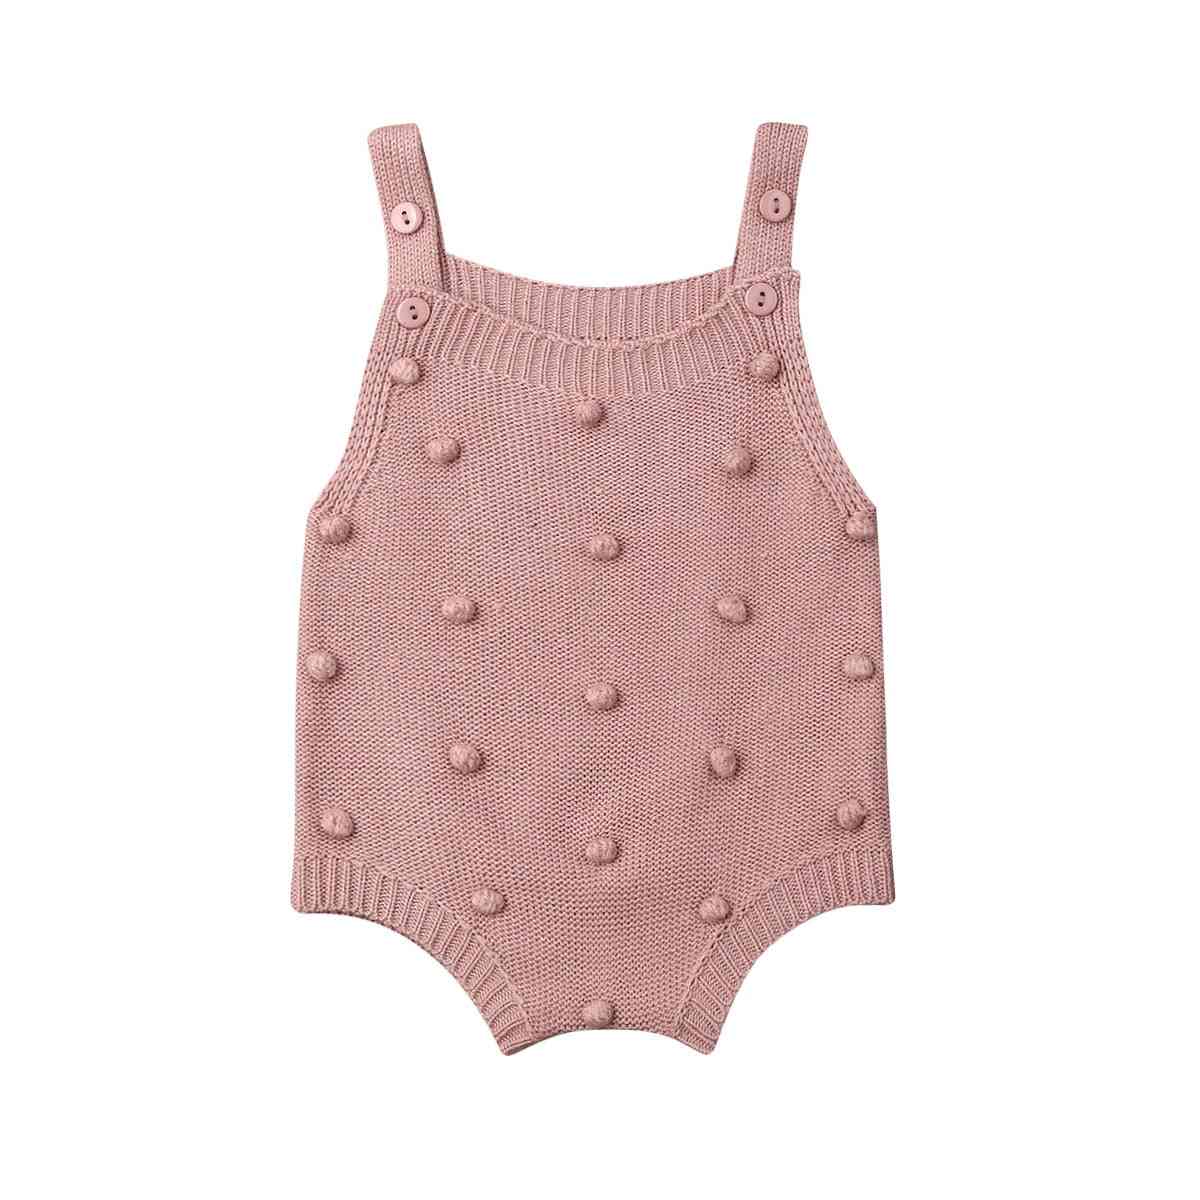 Newborn Baby Knit Dots Jumpsuit - Solid Bodysuit Cotton Sleeveless Outfit